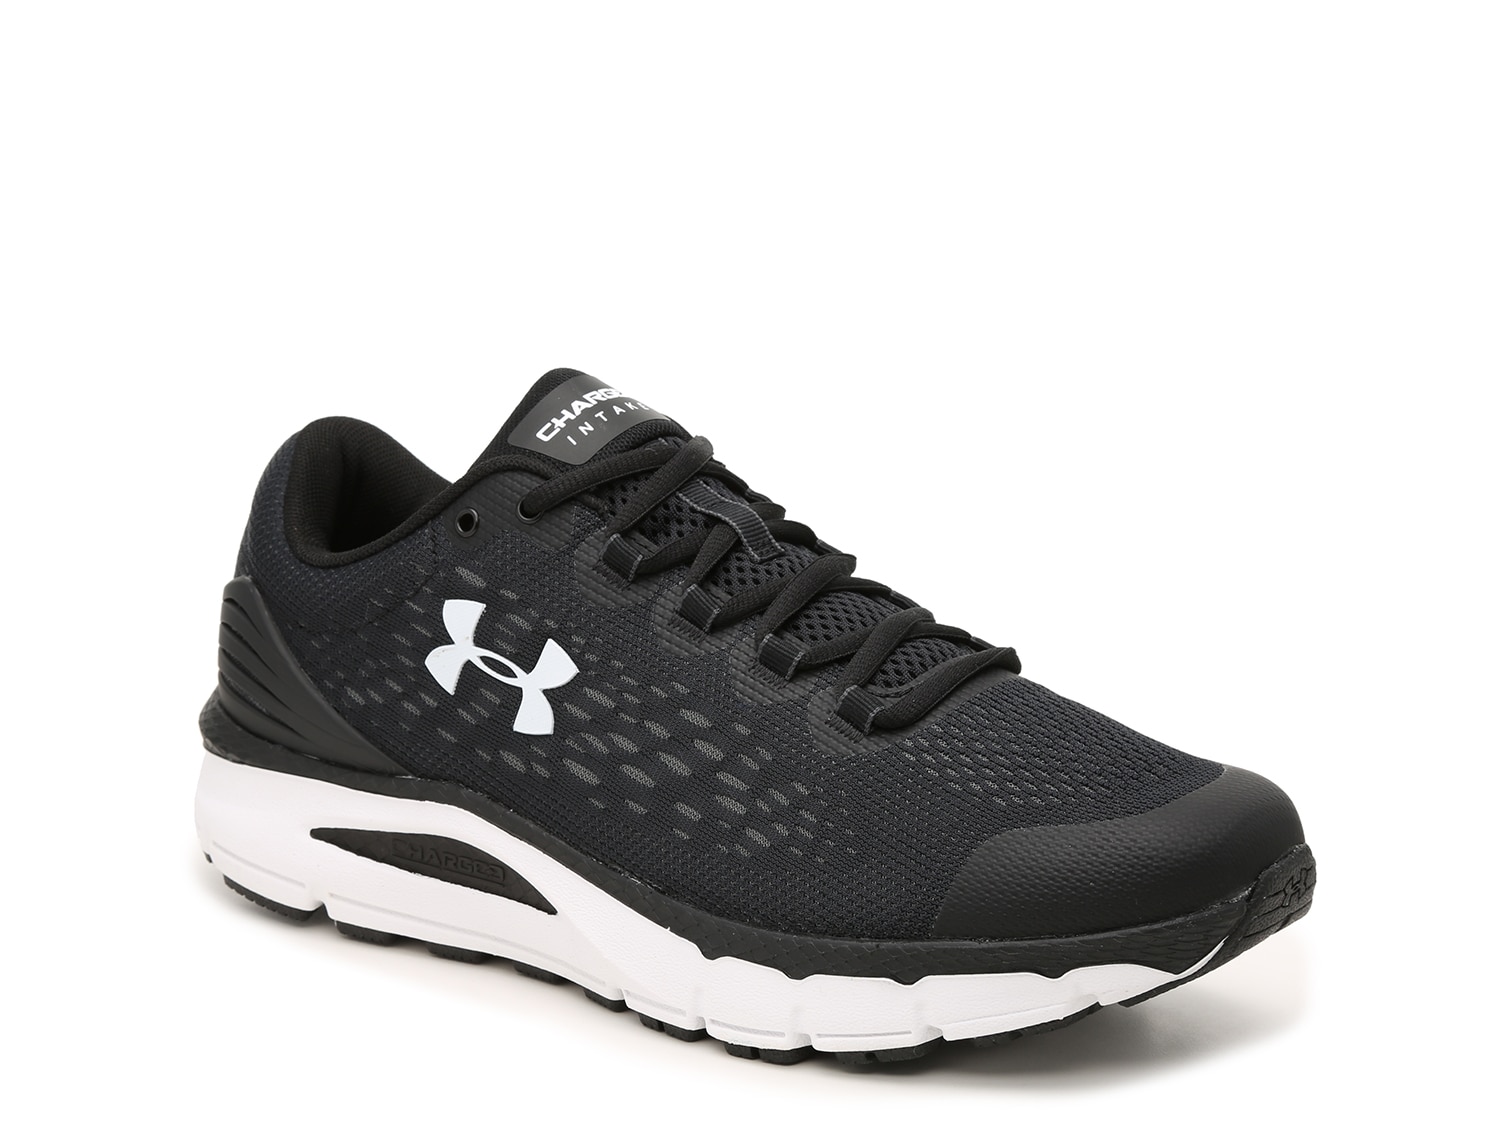 Under Armour Charged Intake 4 Running Shoe - Men's - Free Shipping | DSW